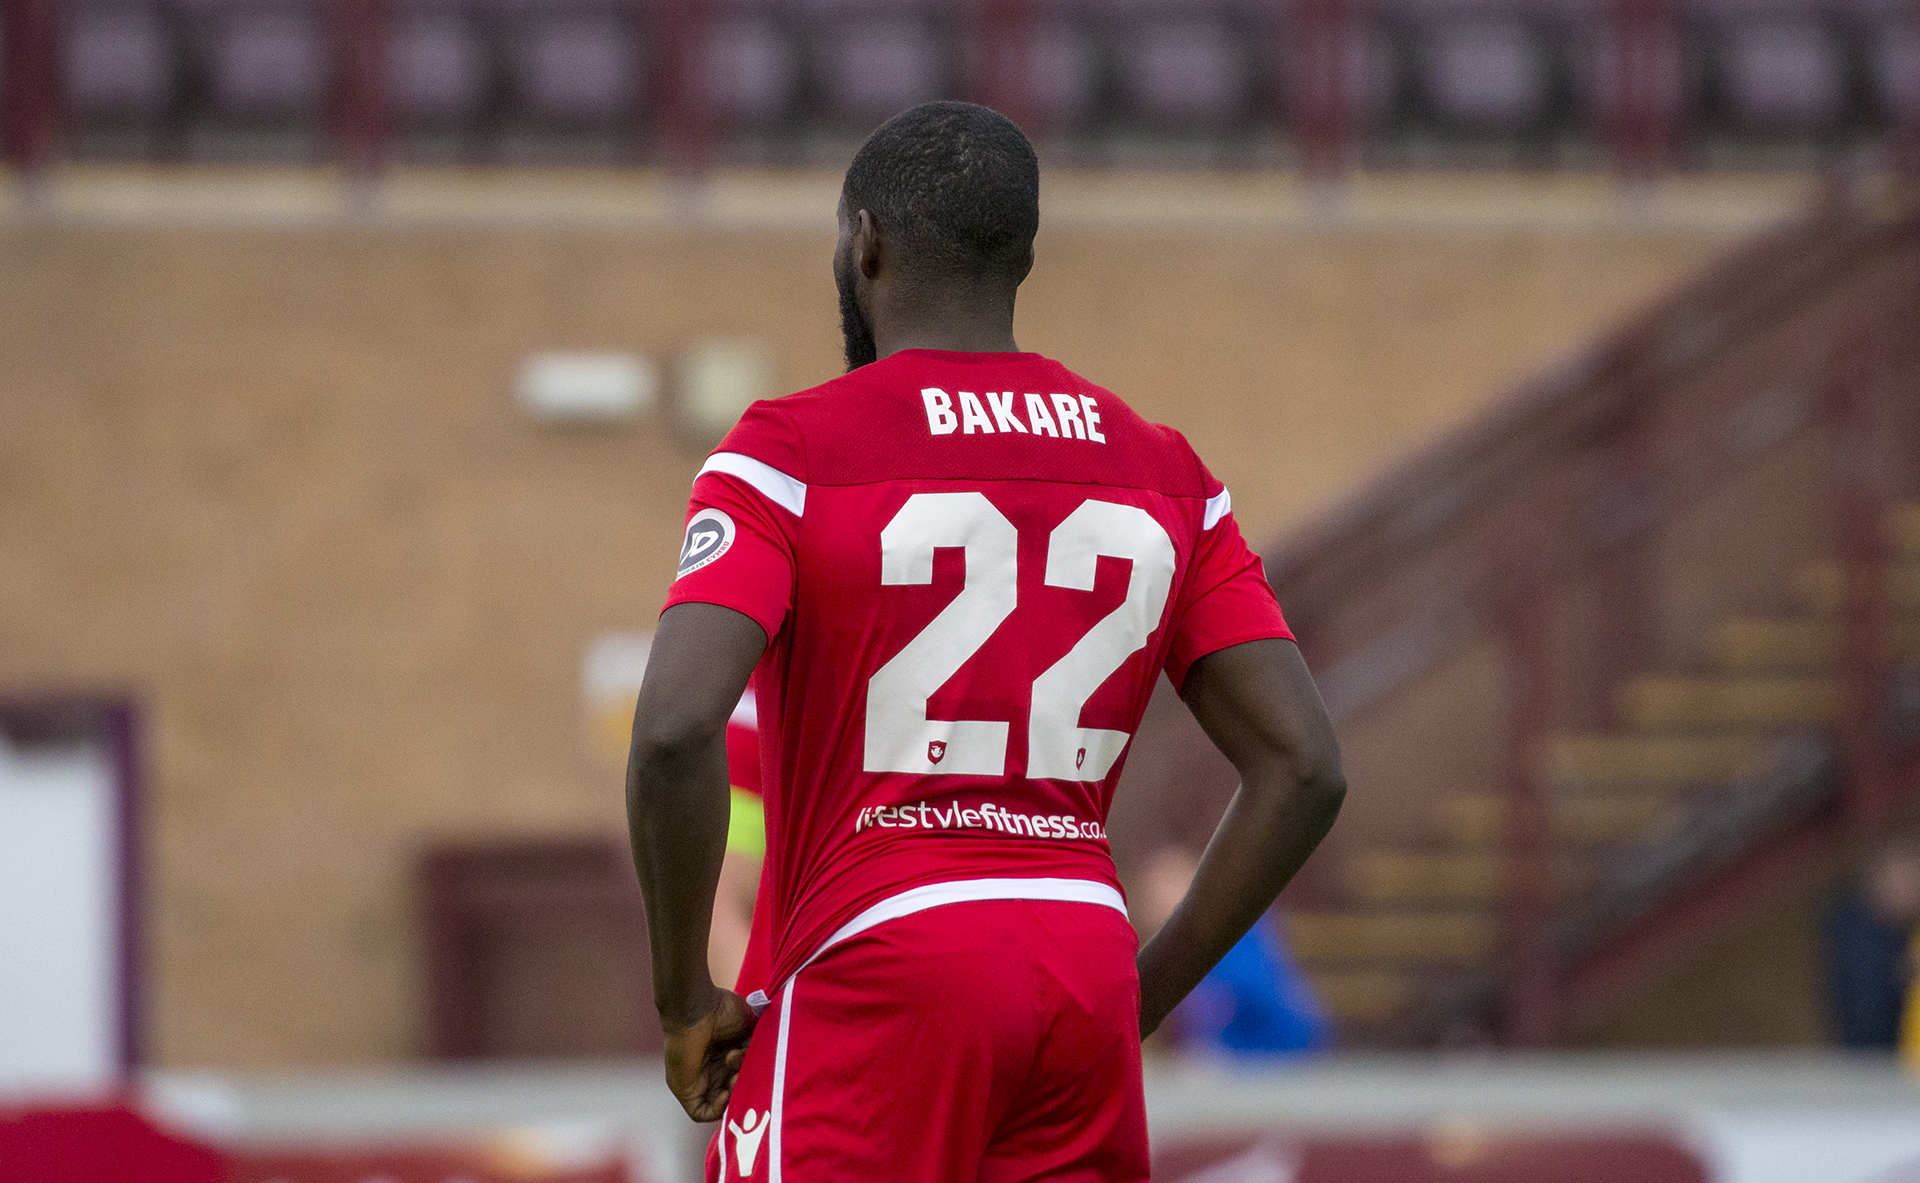 Michael Bakare has signed a new deal at Connah's Quay Nomads until 2020